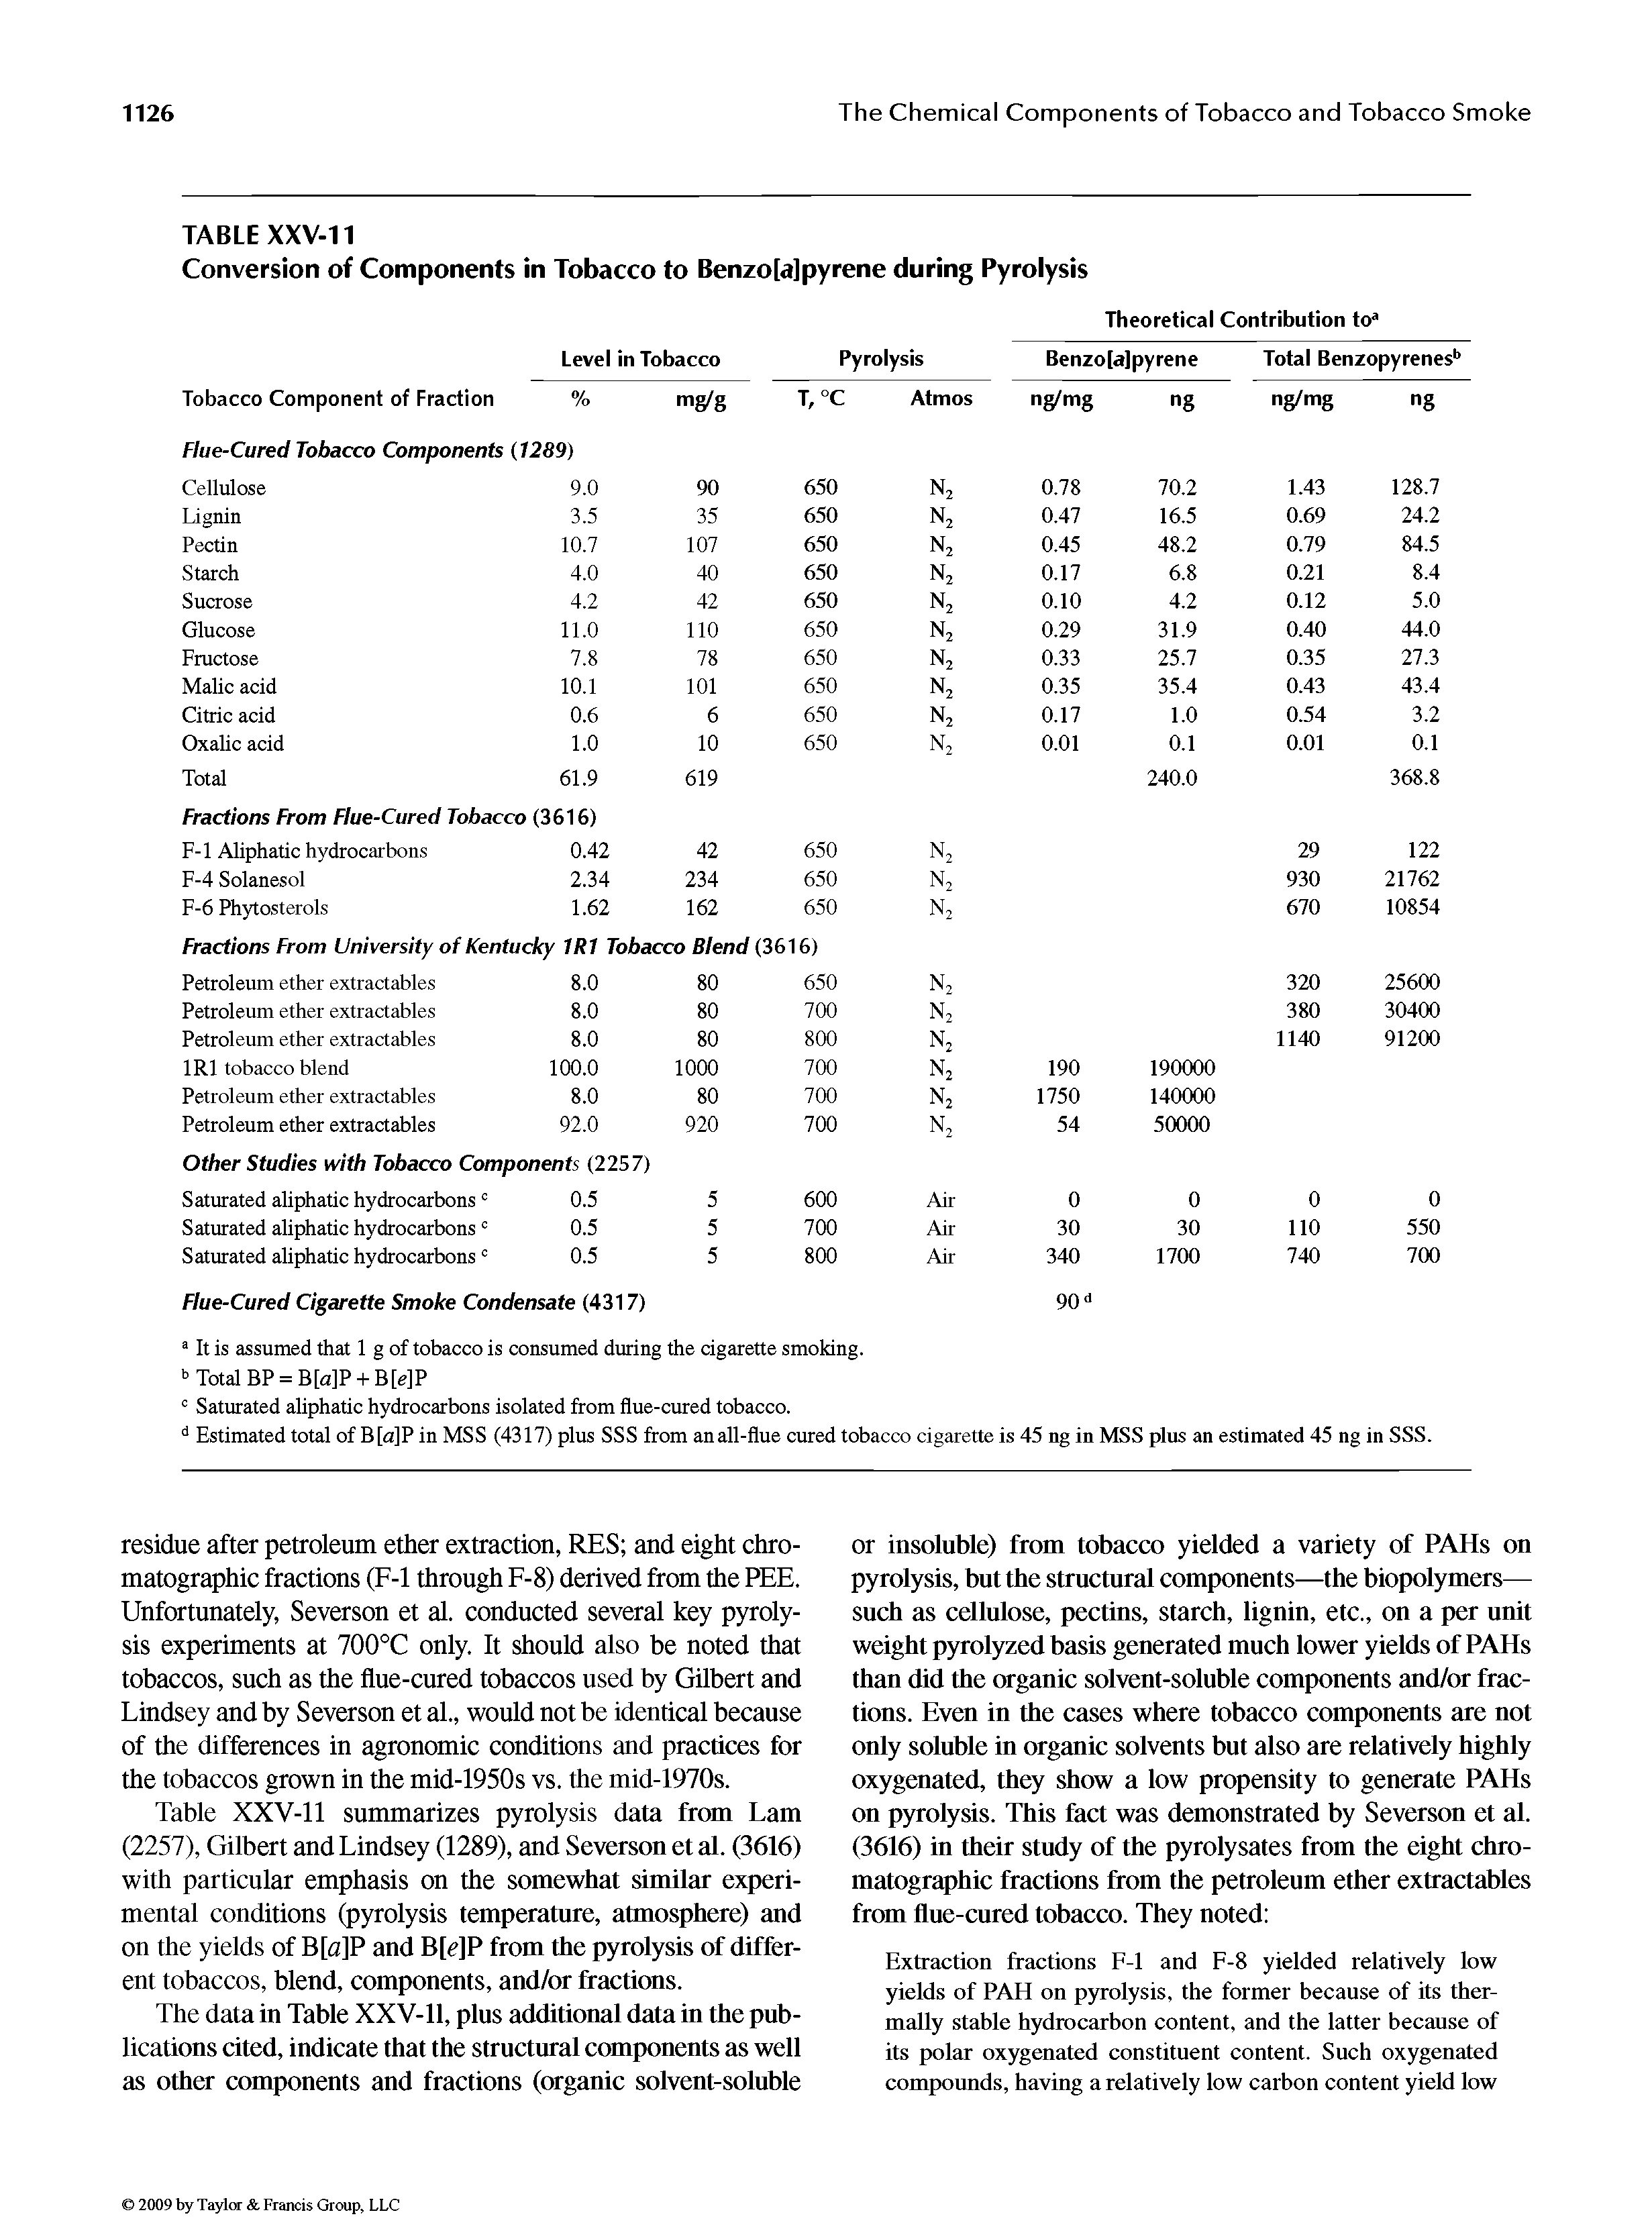 Table XXV-11 summarizes pyrolysis data from Lam (2257), Gilbert and Lindsey (1289), and Severson et al. (3616) with particular emphasis on the somewhat similar experimental conditions (pyrolysis temperature, atmosphere) and on the yields of B[fl]P and B[c]P from the pyrolysis of different tobaccos, blend, components, and/or fractions.